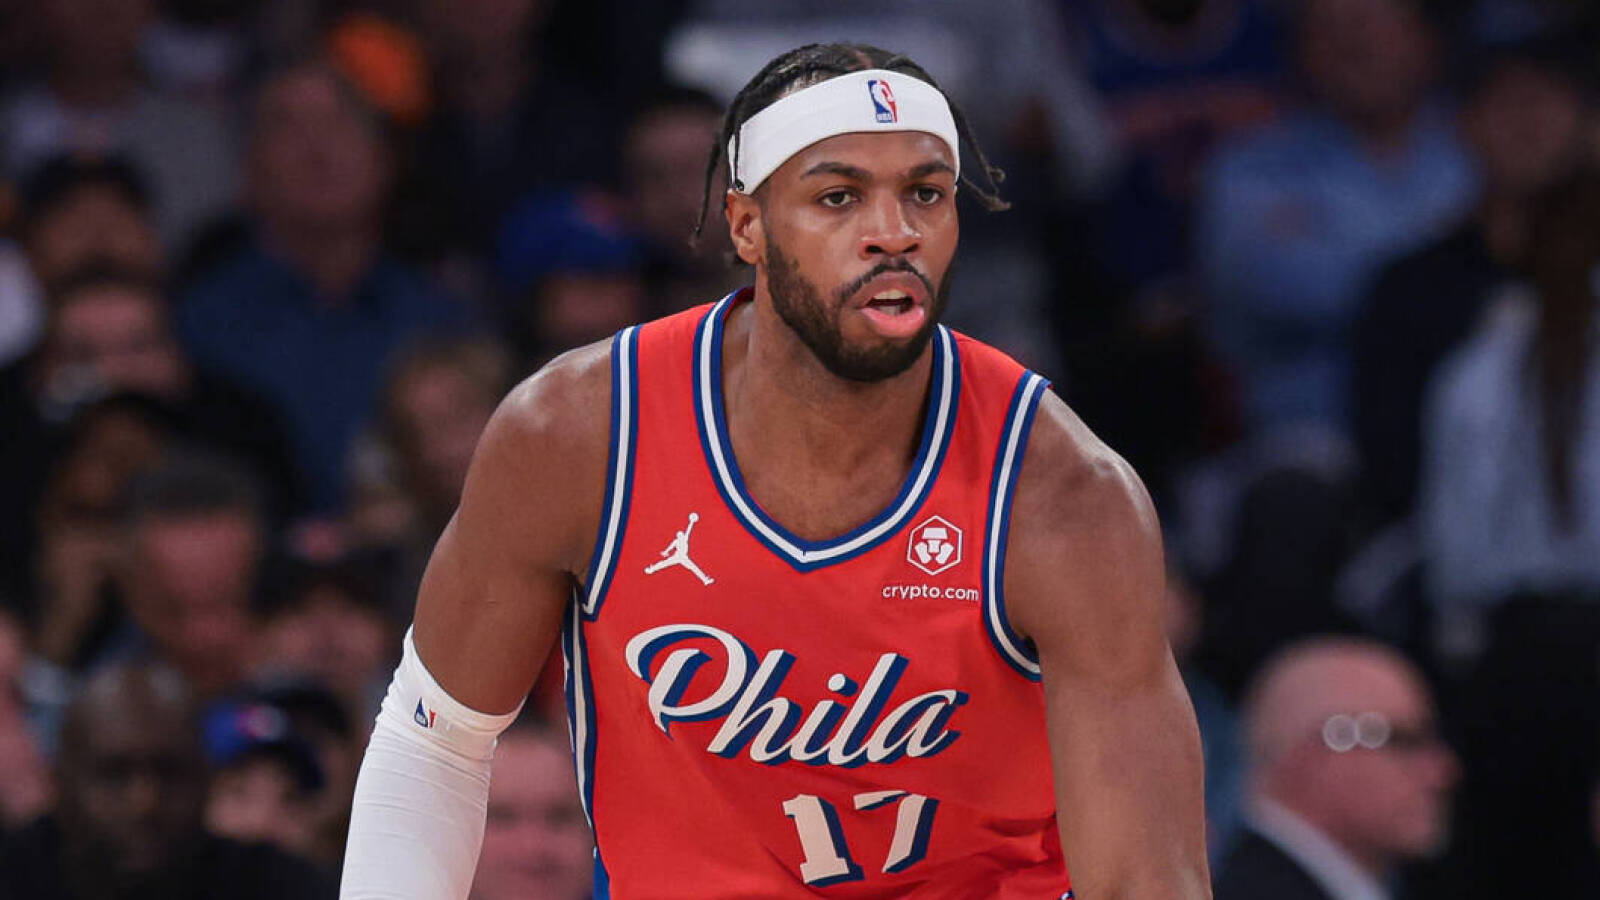 Buddy Hield's no-show performance has been dagger in 76ers' playoff series